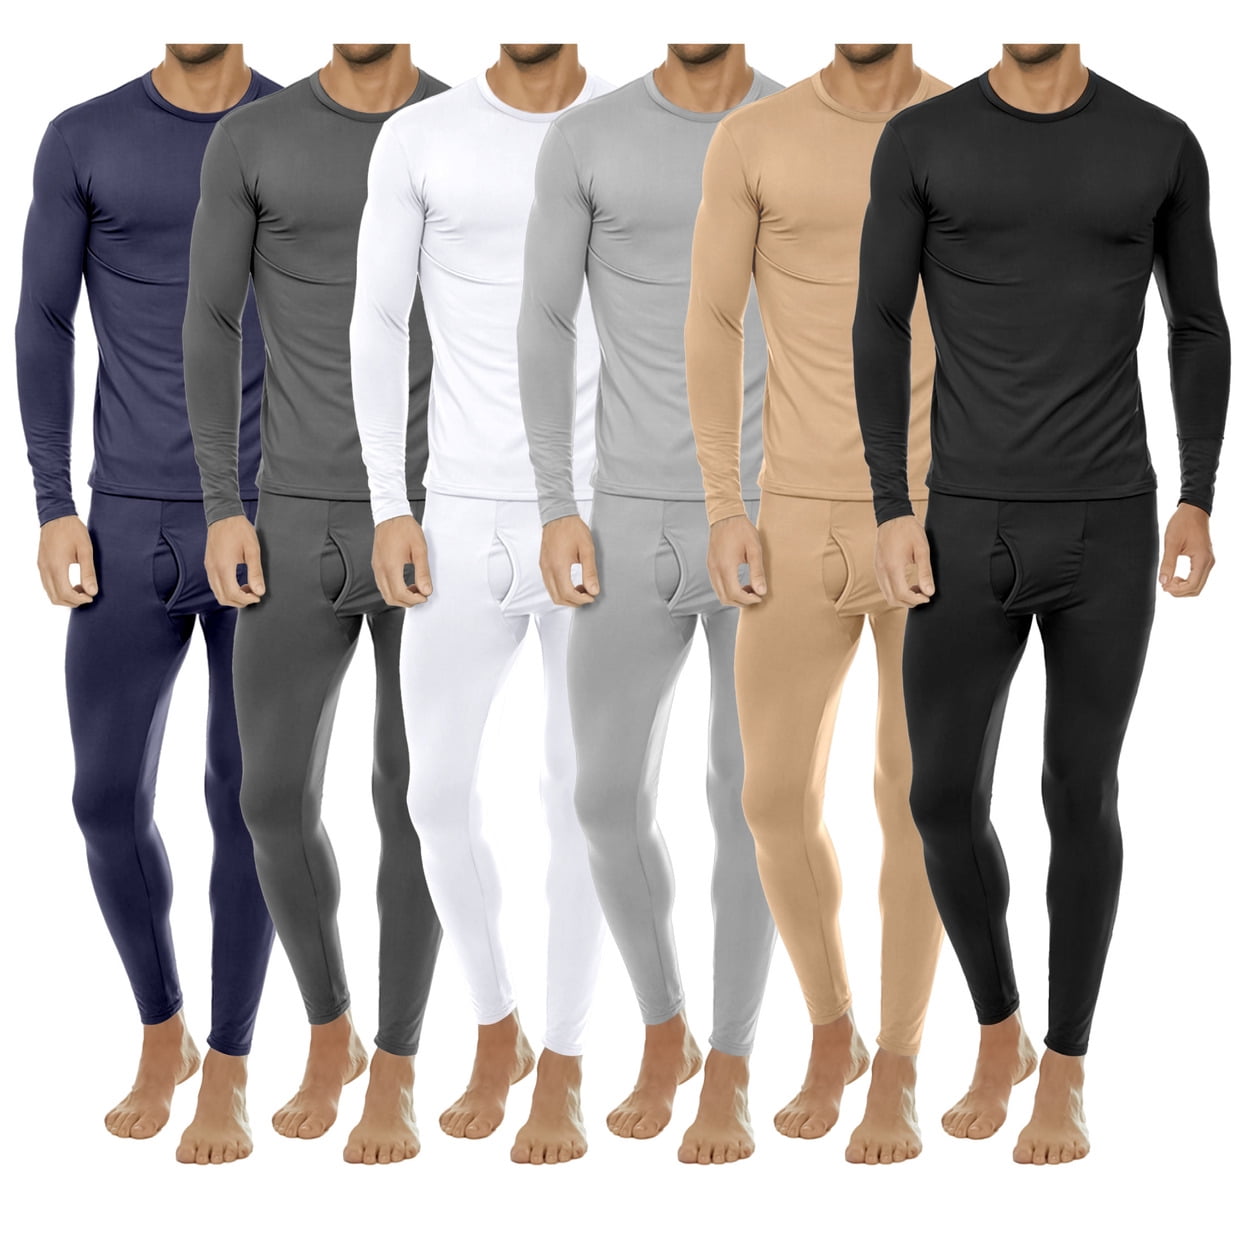 2-Pieces: Men's Winter Warm Fleece Lined Thermal Underwear Set for Cold ...